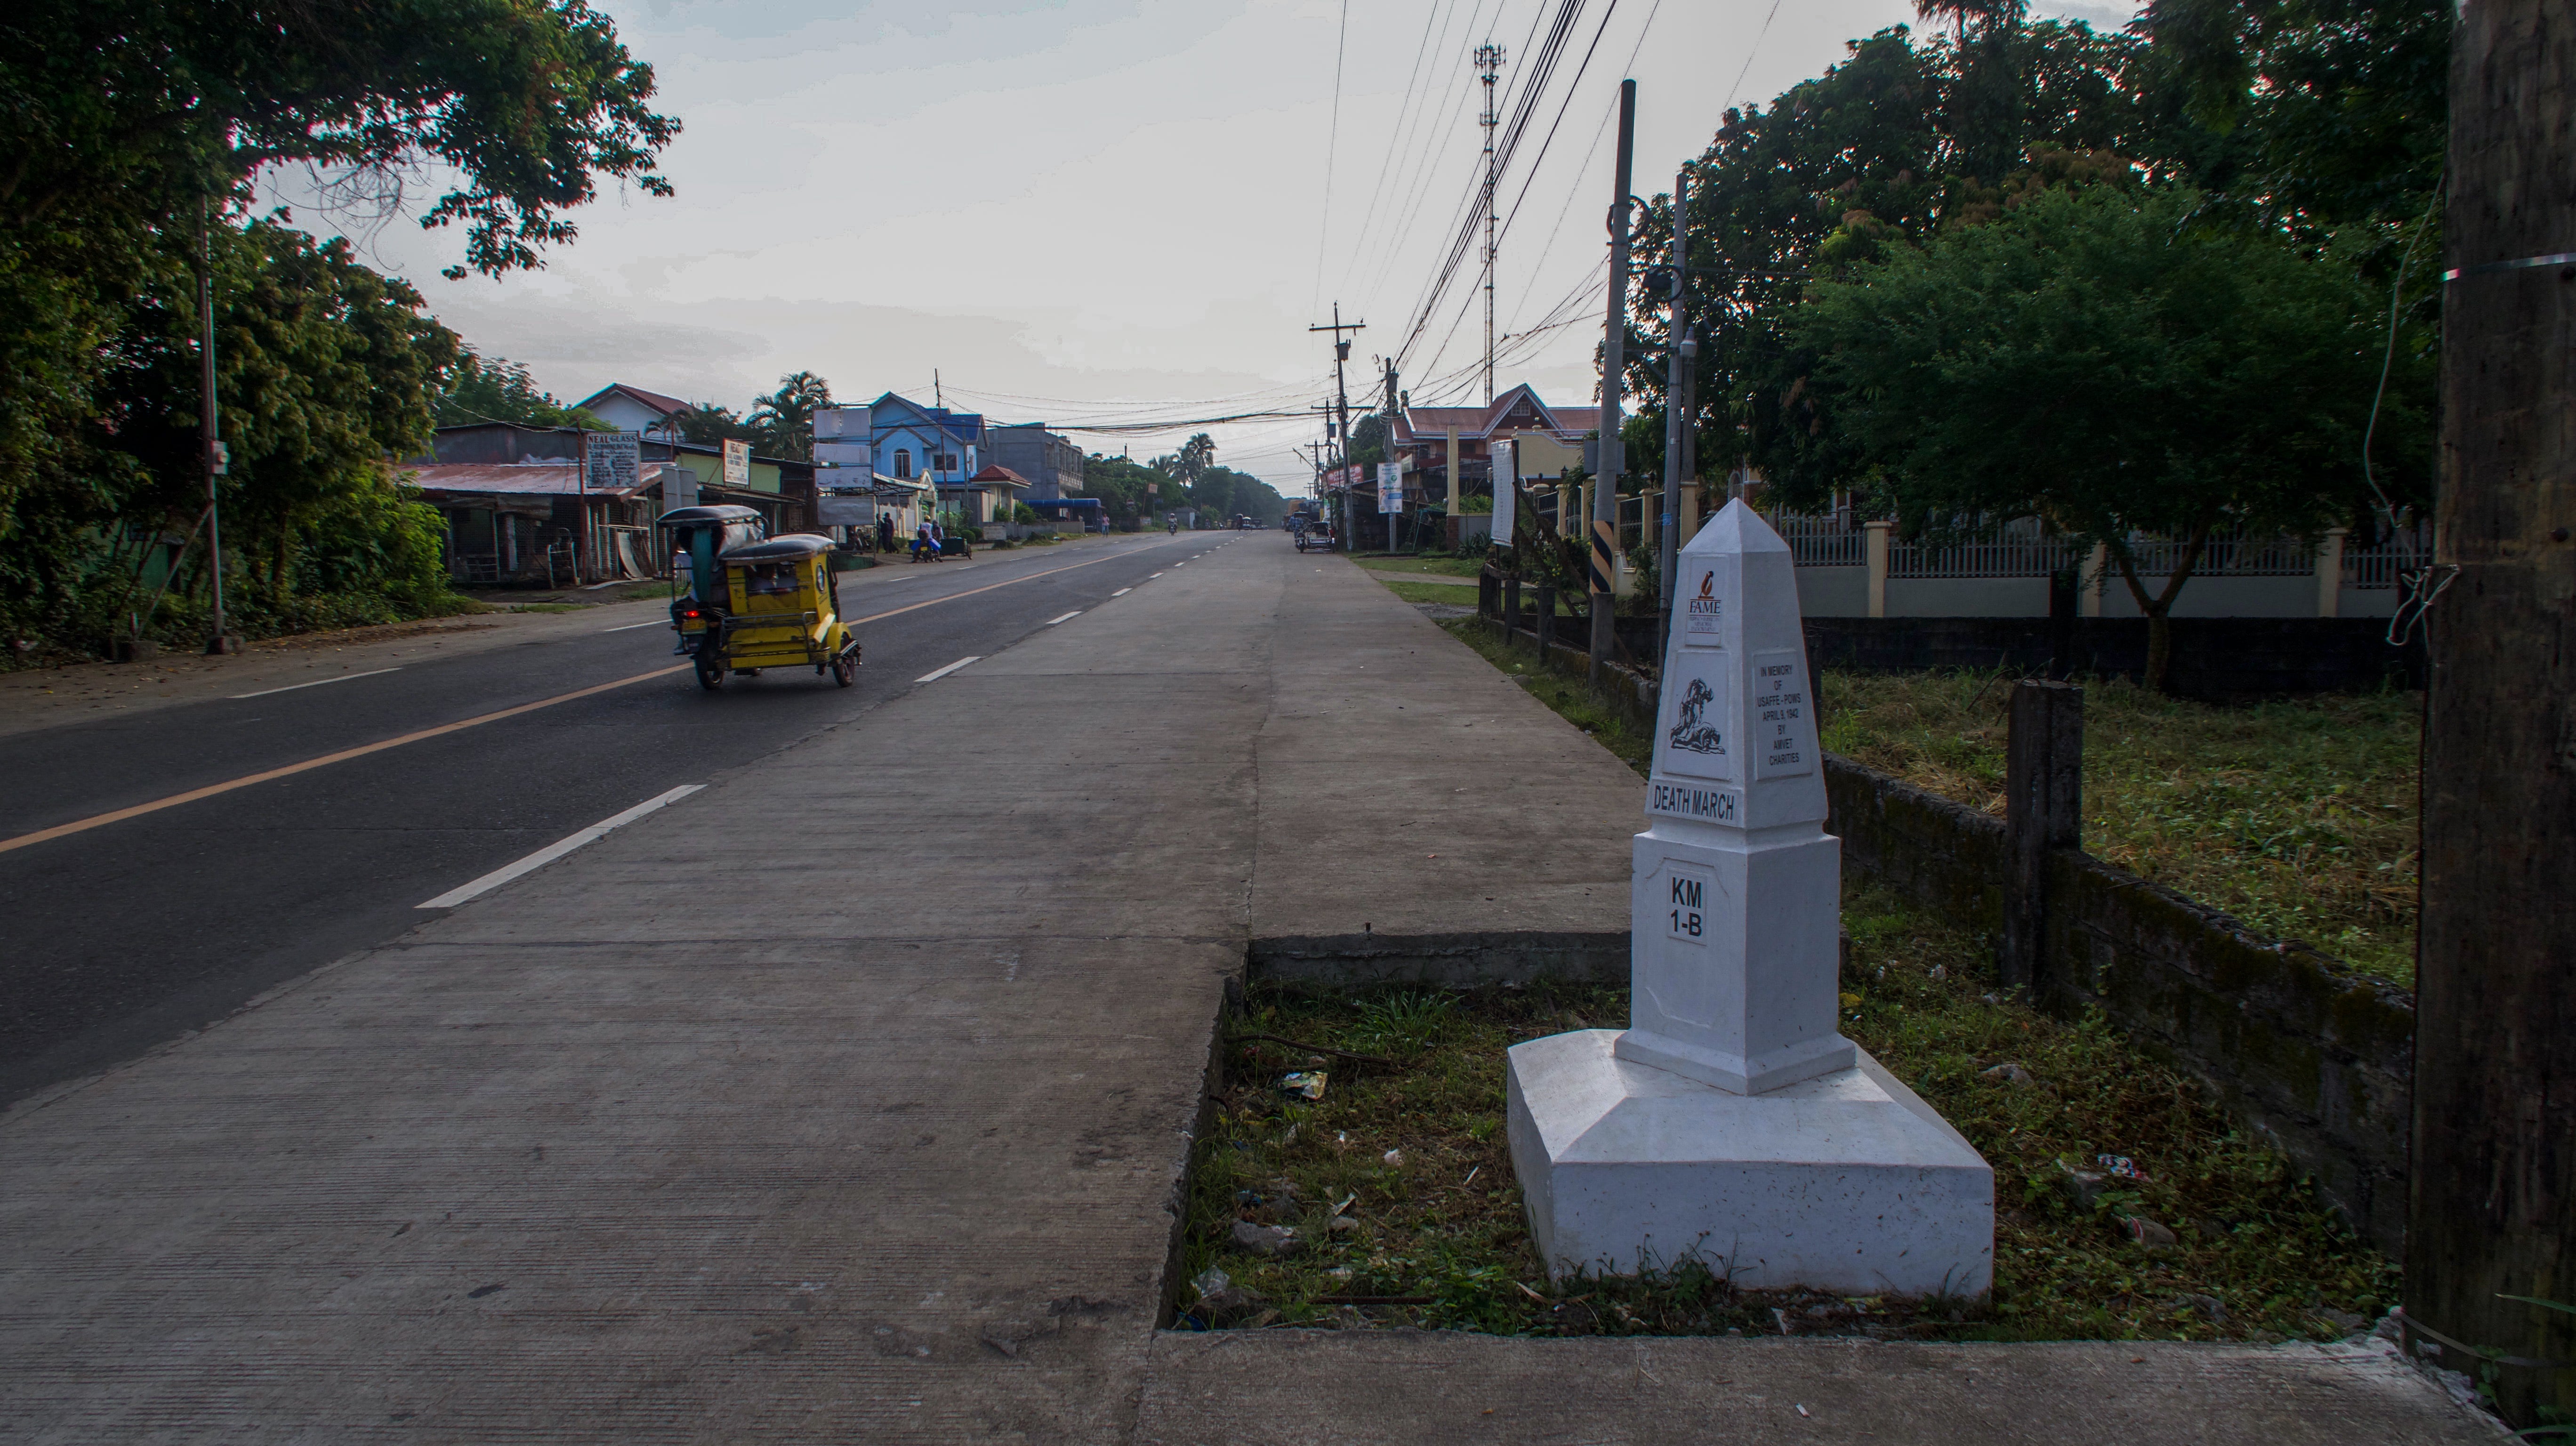 death marker as a monument of the deathmarch, located near the philippine-japanese friendship tower in bagac